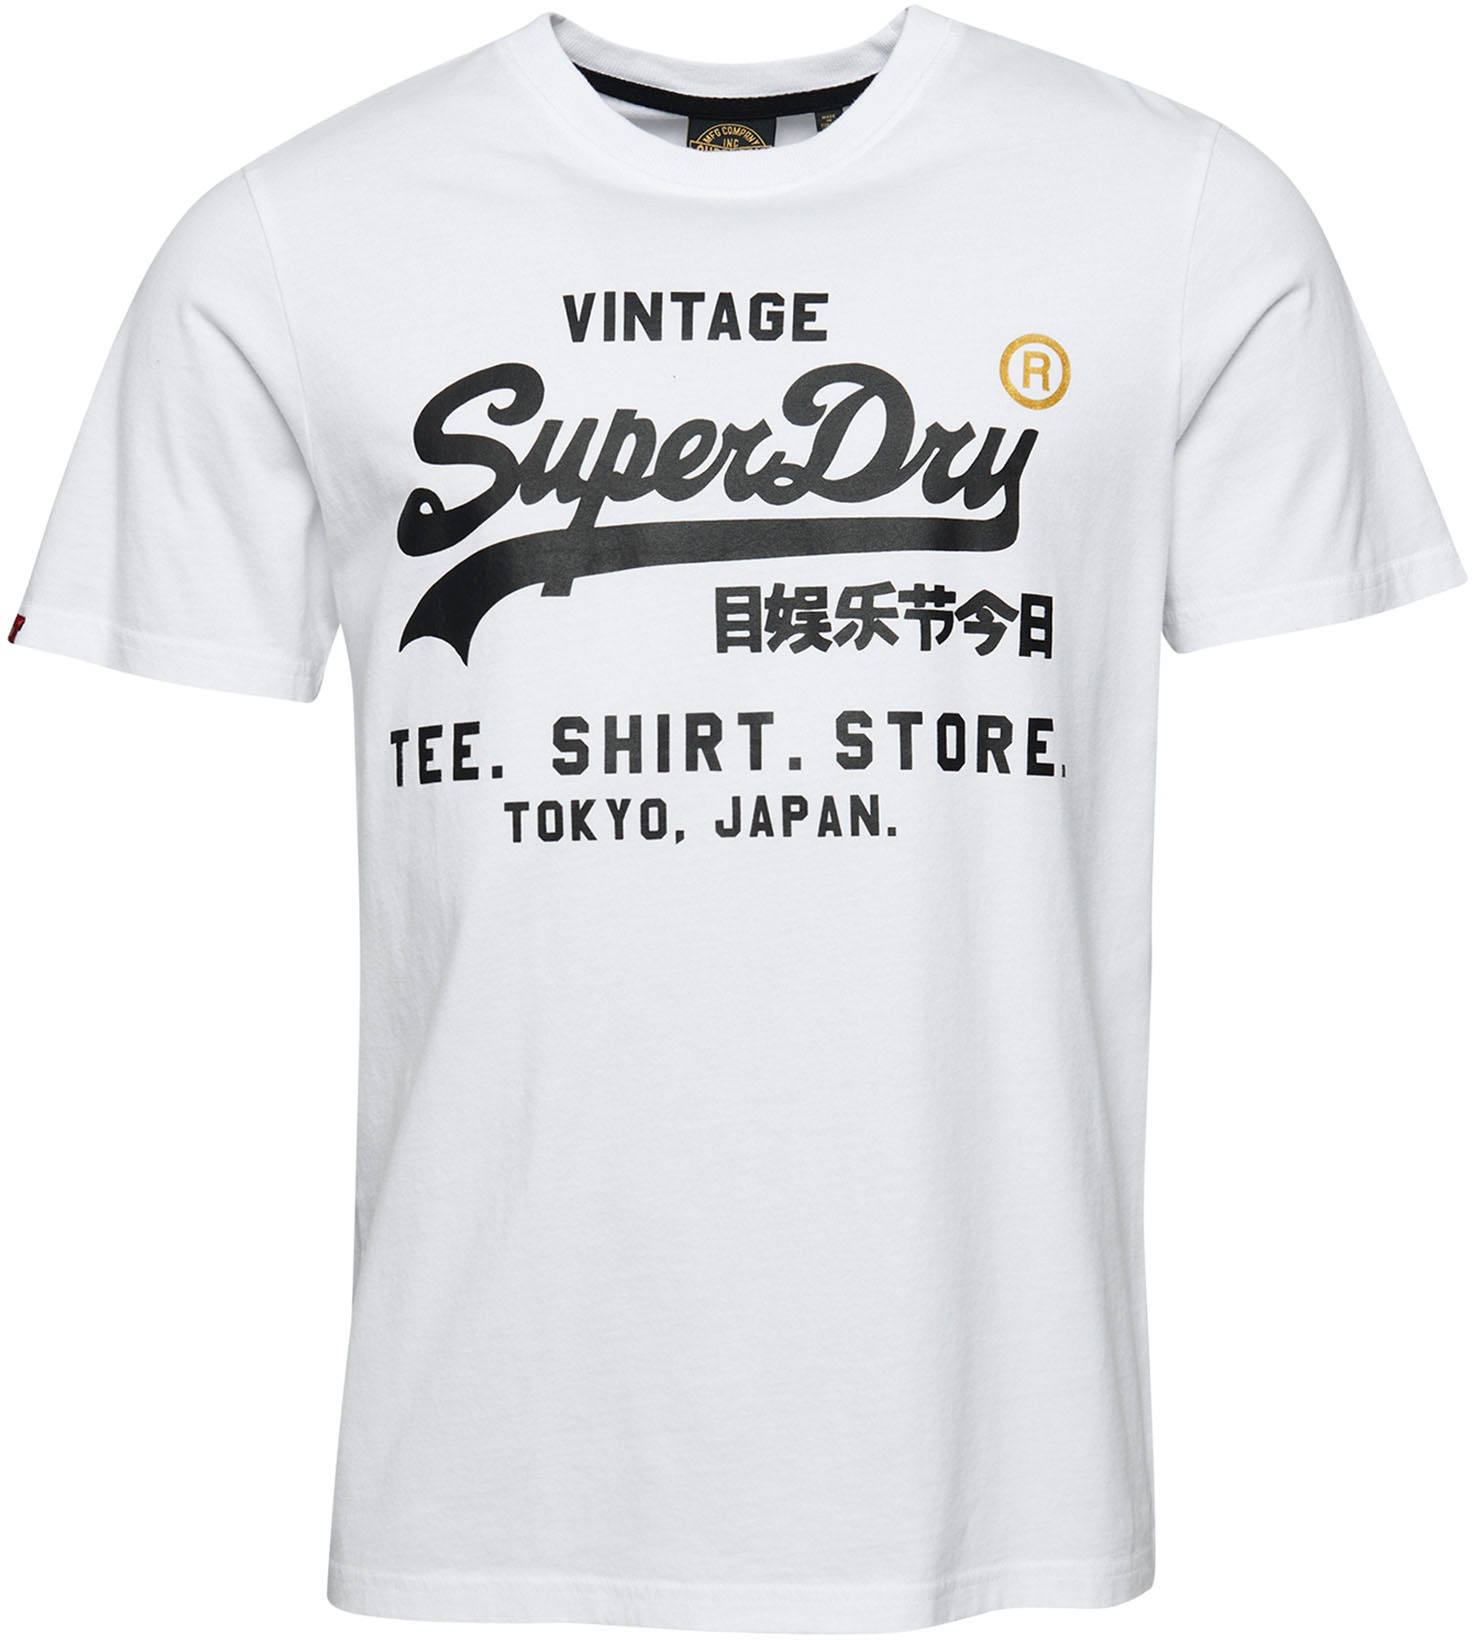 bei T-Shirt ♕ »VINTAGE Superdry CLASSIC VL STORE TEE«